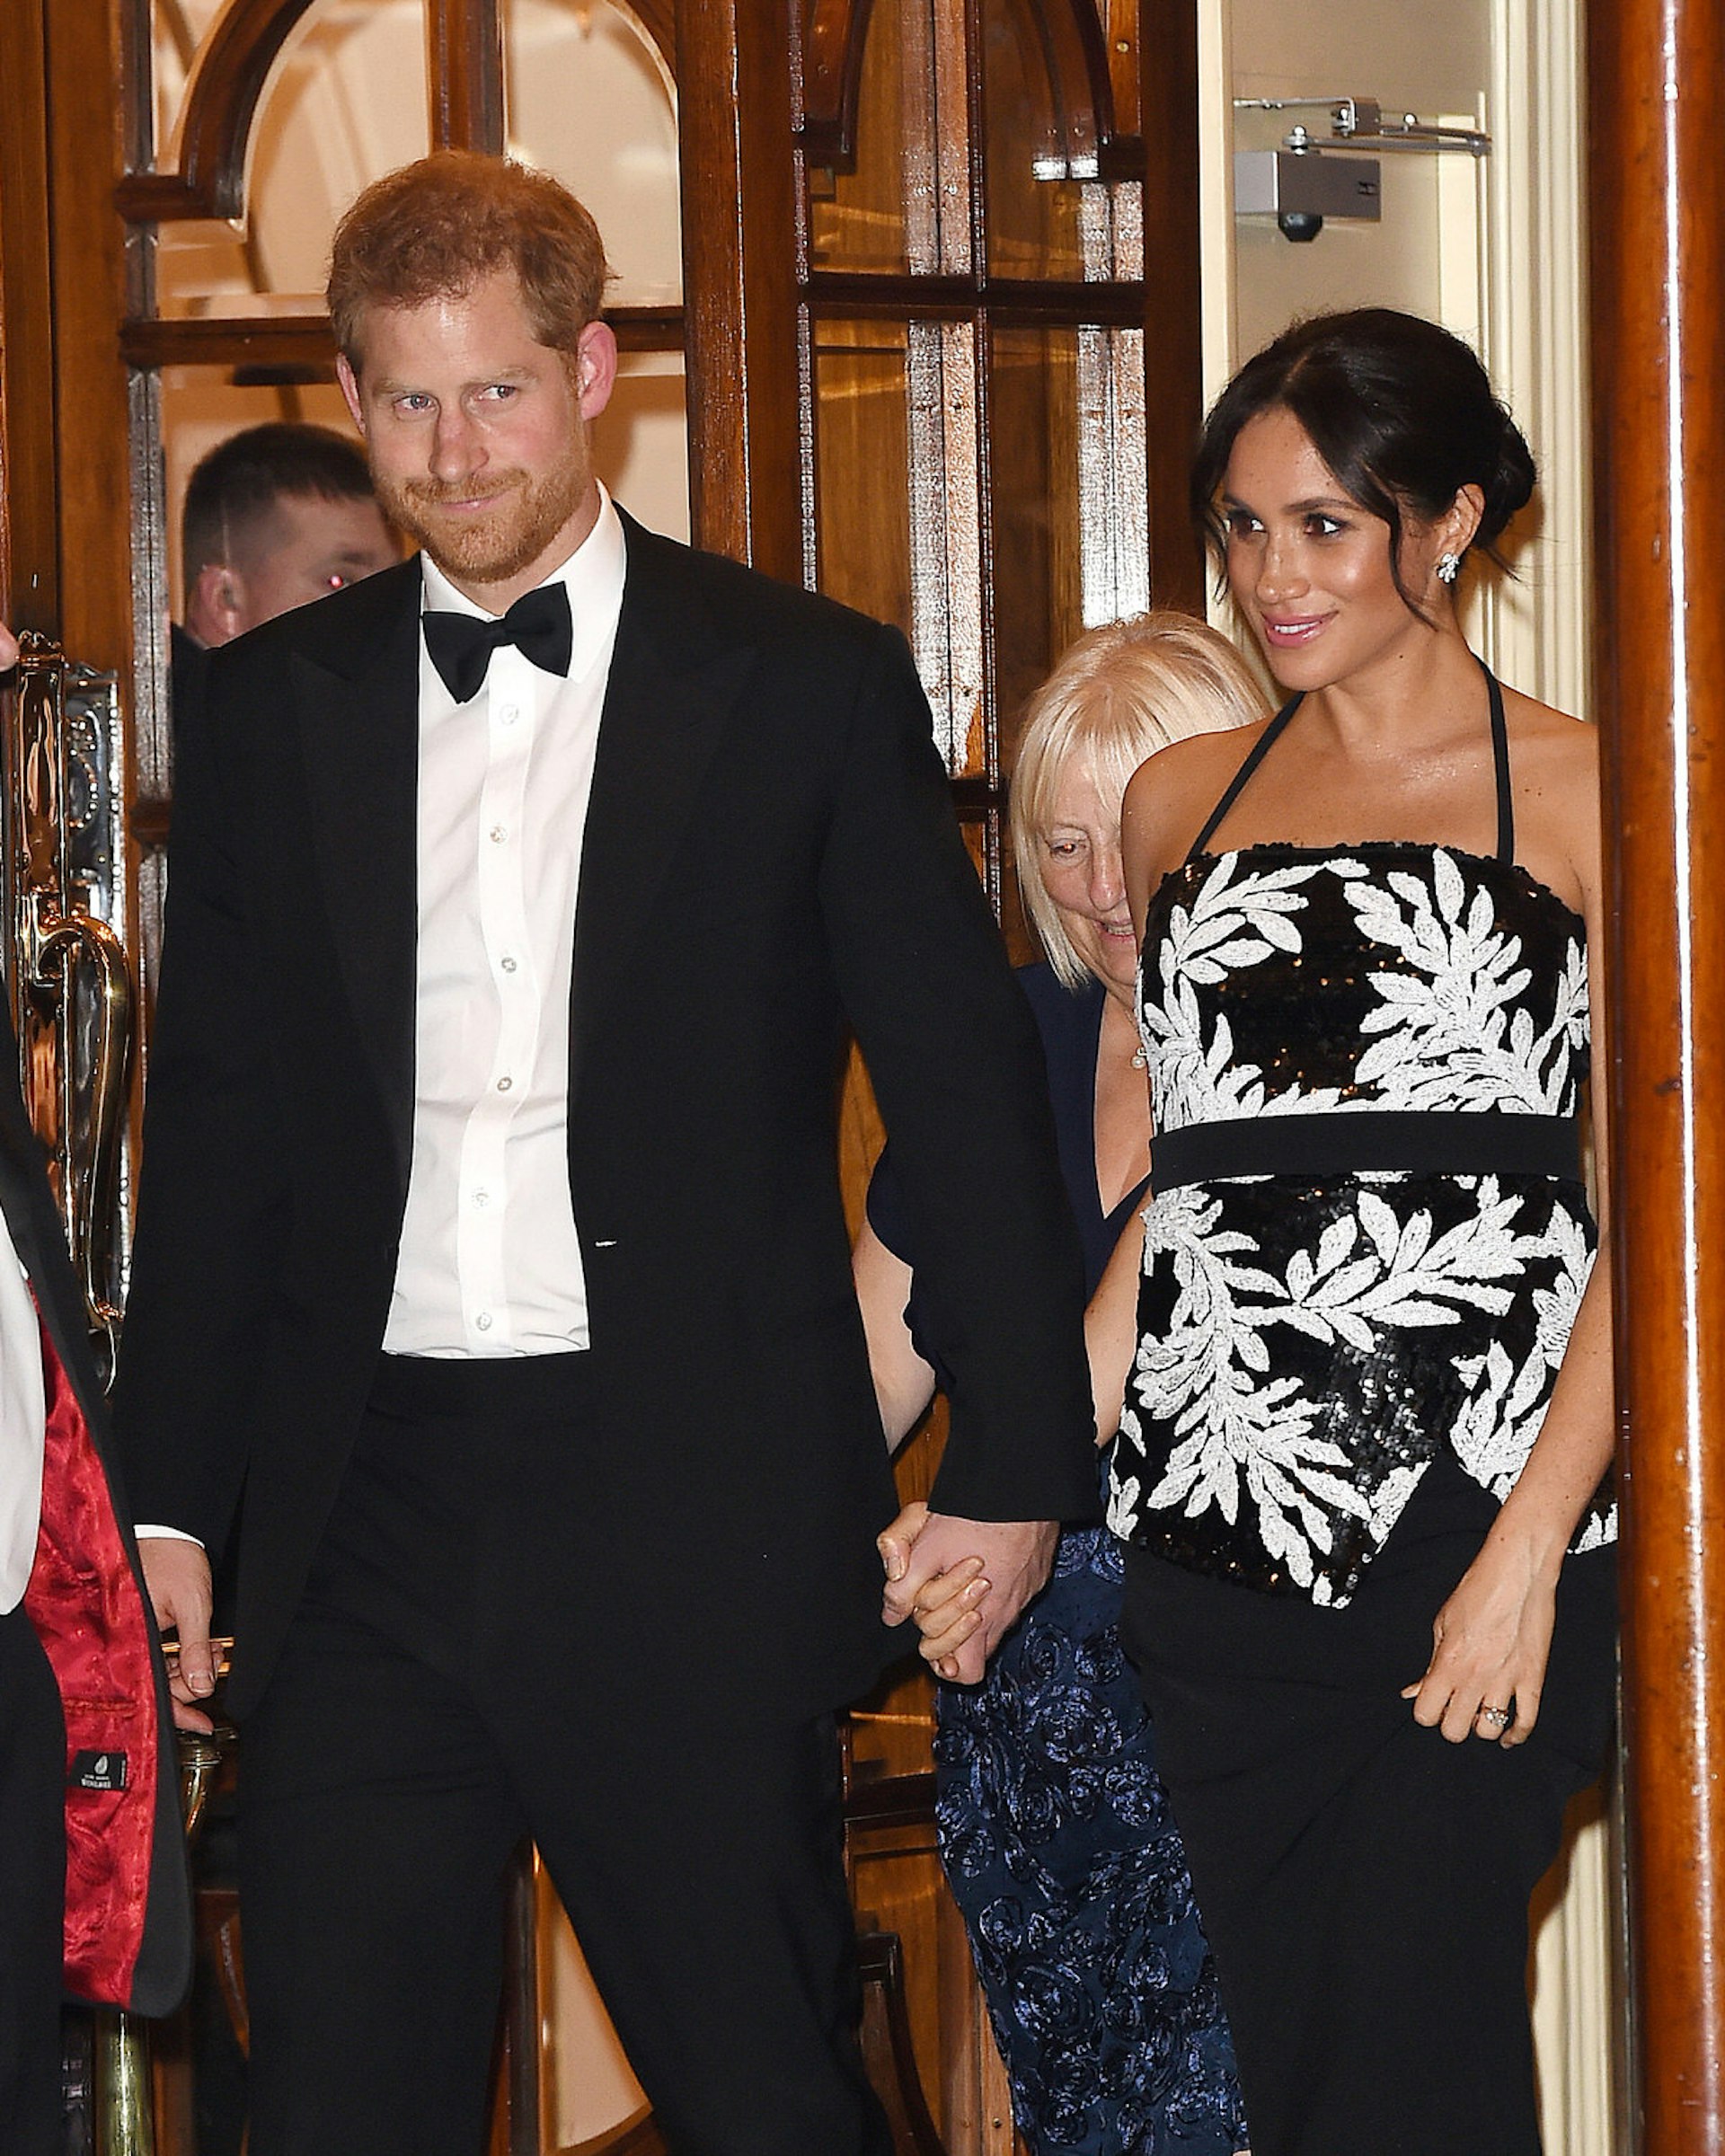 LONDON, ENGLAND - NOVEMBER 19: Prince Harry, Duke of Sussex and Meghan, Duchess of Sussex seen leaving The Royal Variety Performance 2018 at London Palladium on November 19, 2018 in London, England © Ricky Vigil M/GC Images